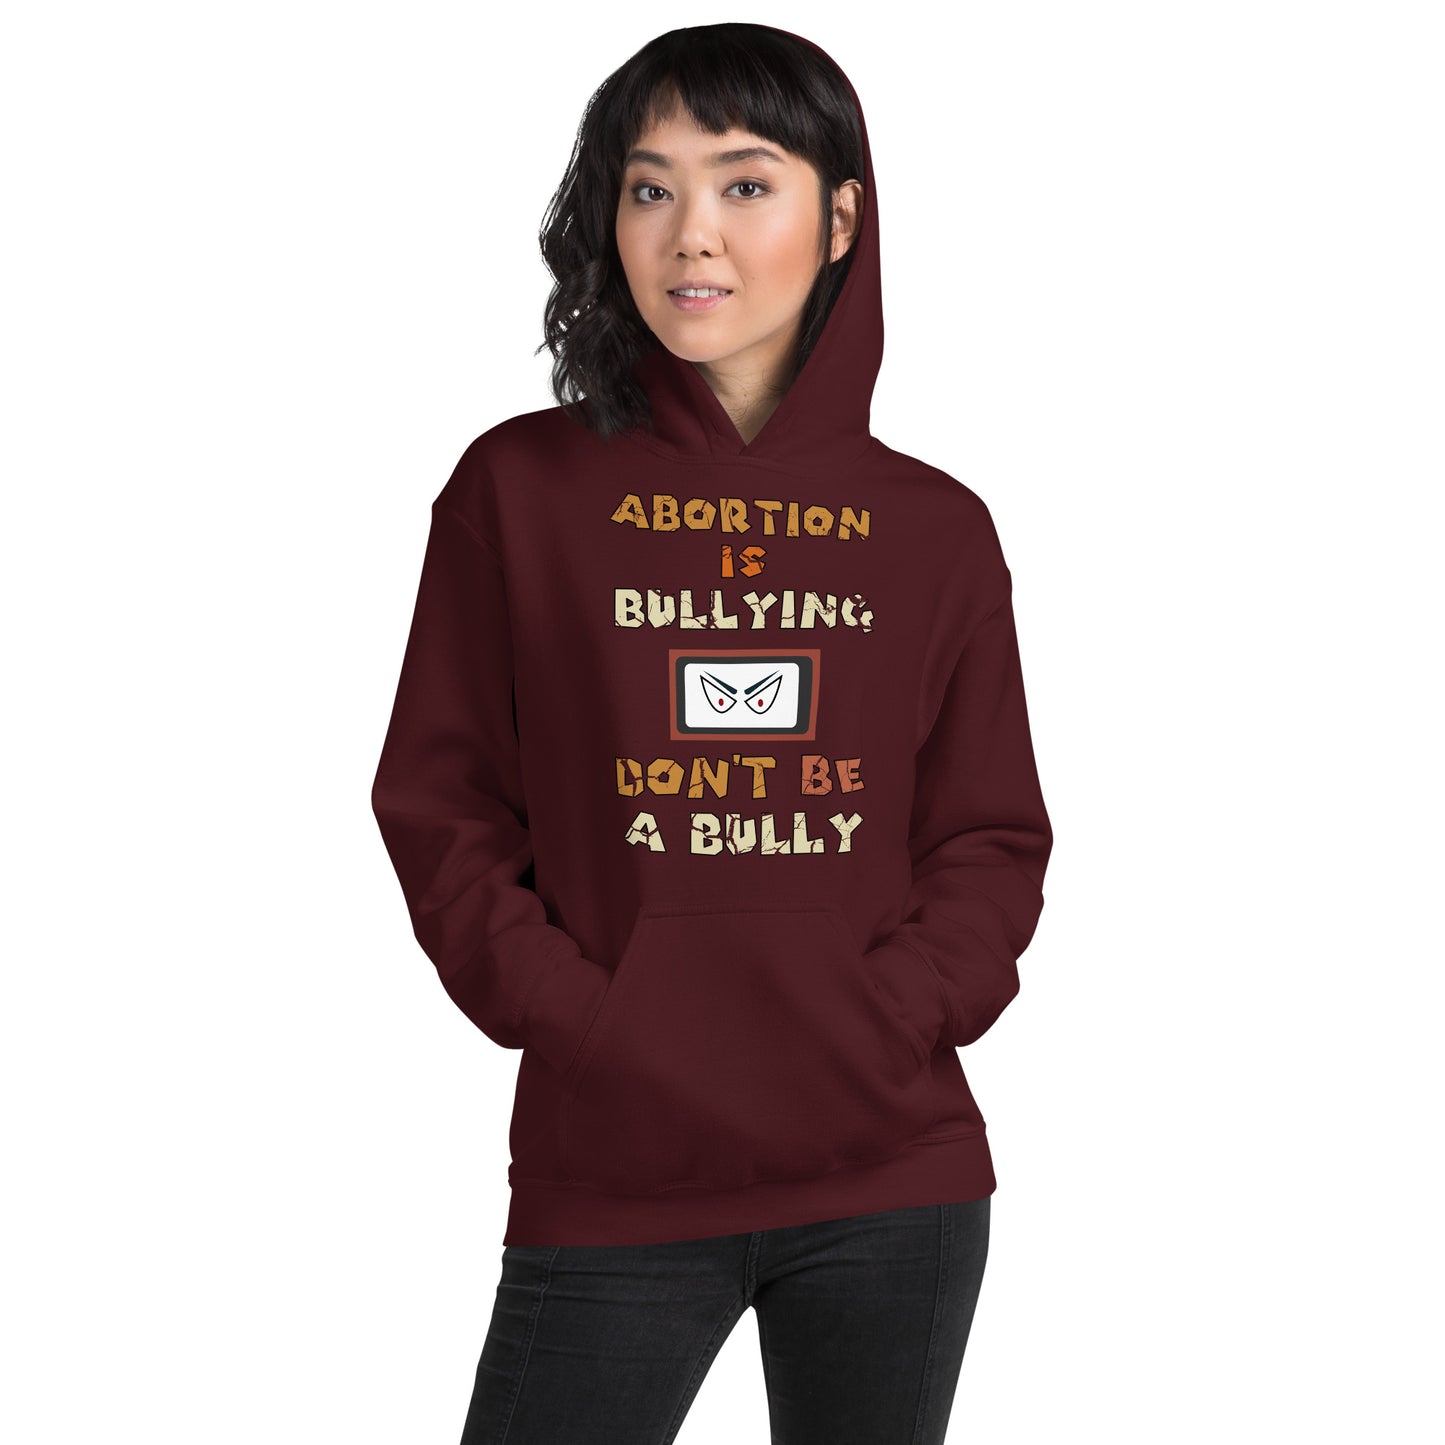 A001 Hoodie – Gildan 18500 Unisex Hoodie Featuring Sinister Eyes Graphic with text “Abortion is Bullying. Don’t be a Bully.”